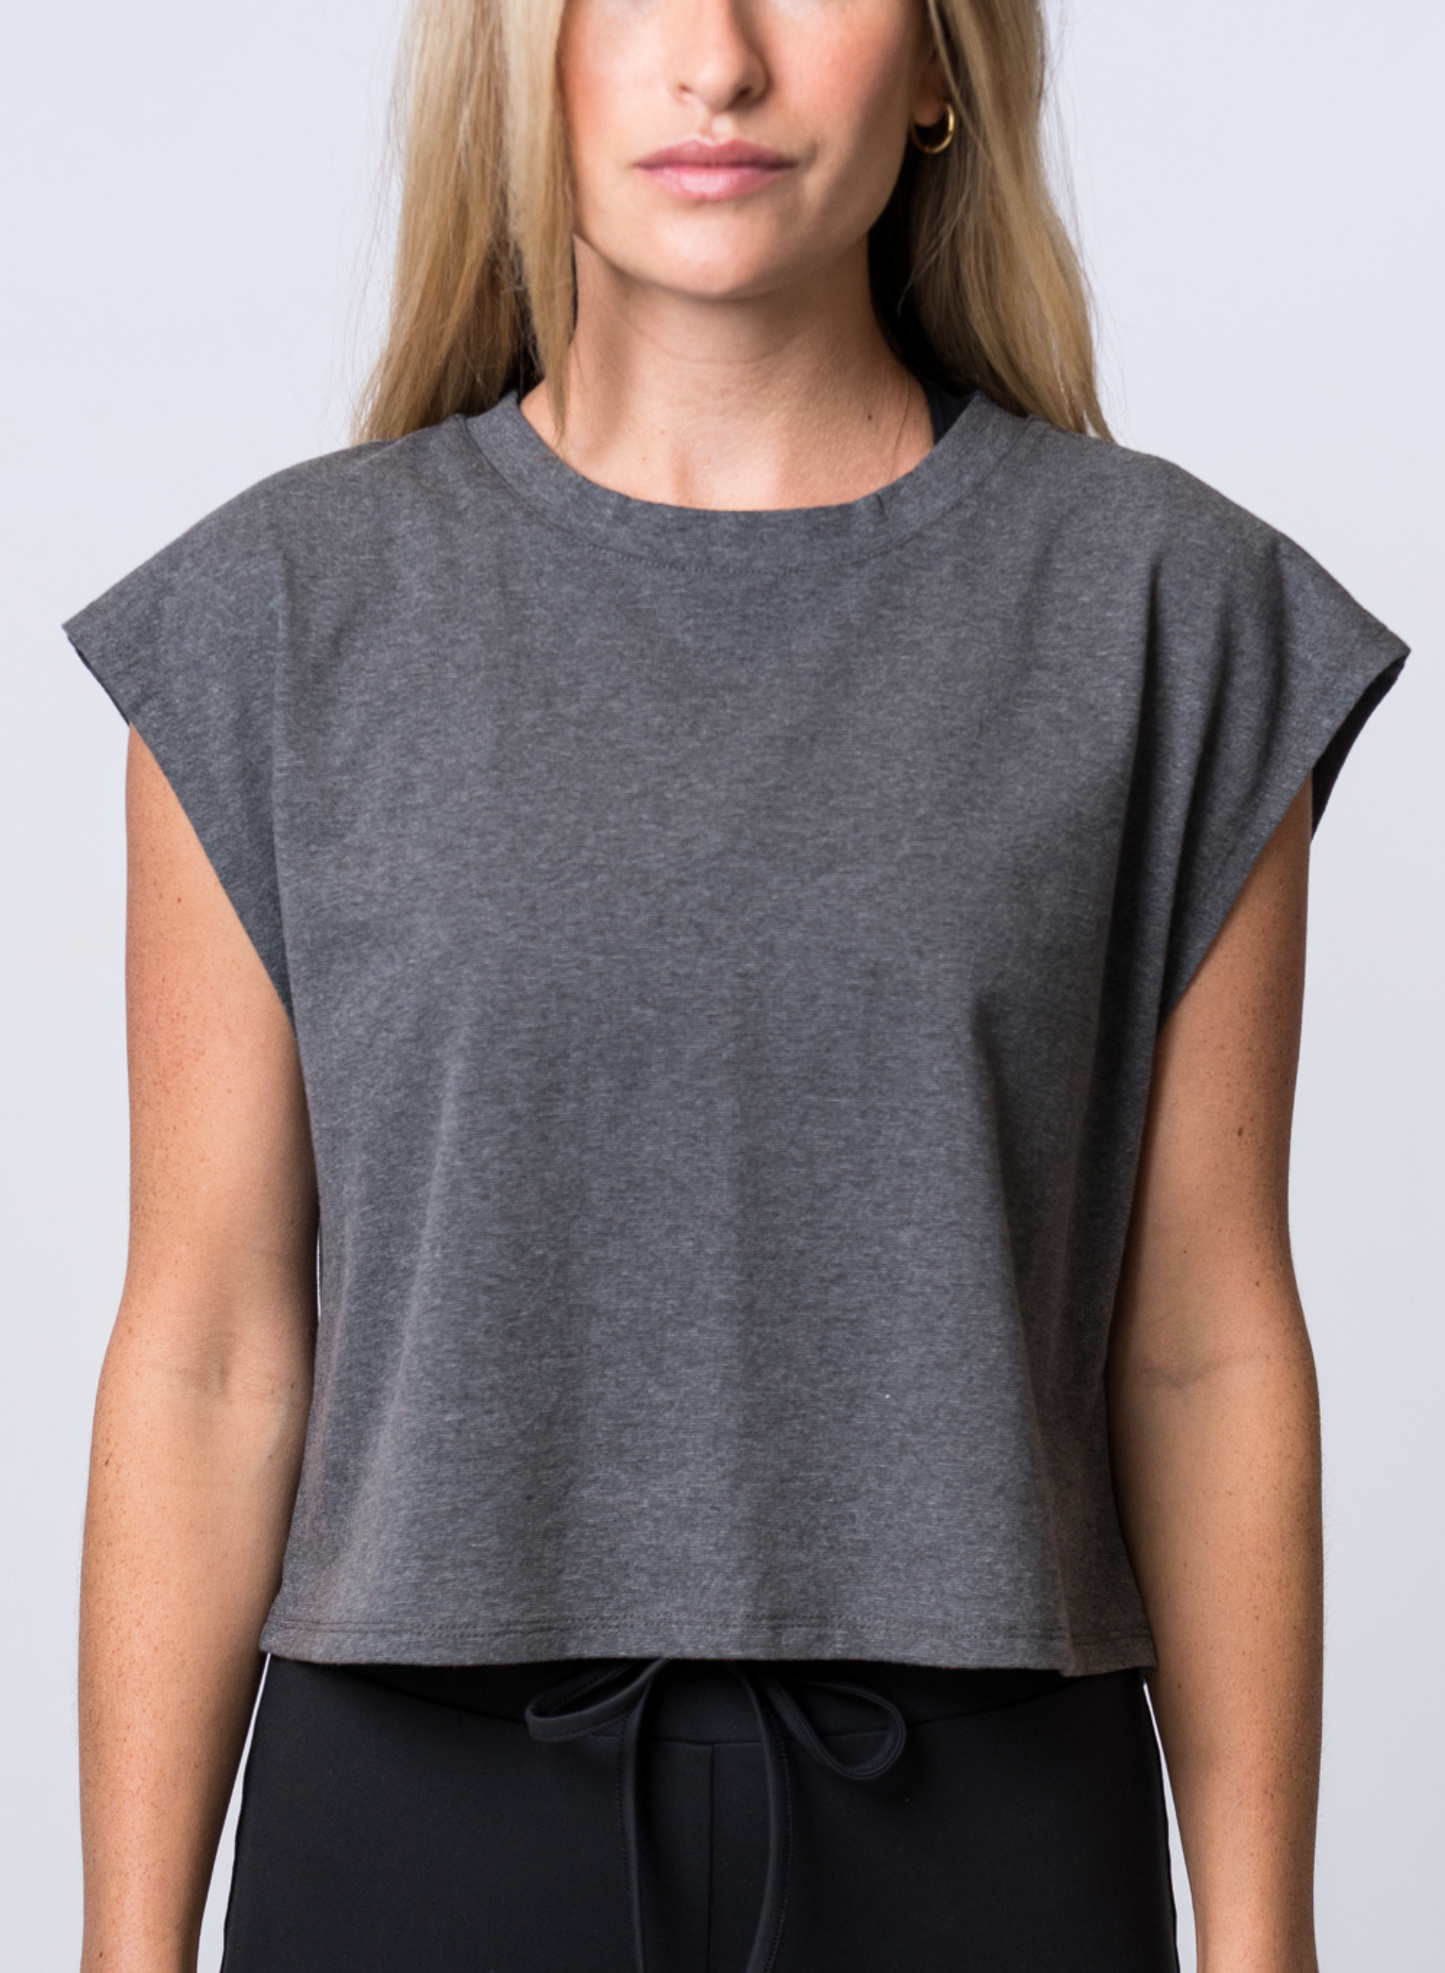 Woman wearing a dark gray, crop top with black drawstring lounge pants. Front of clothing is being shown